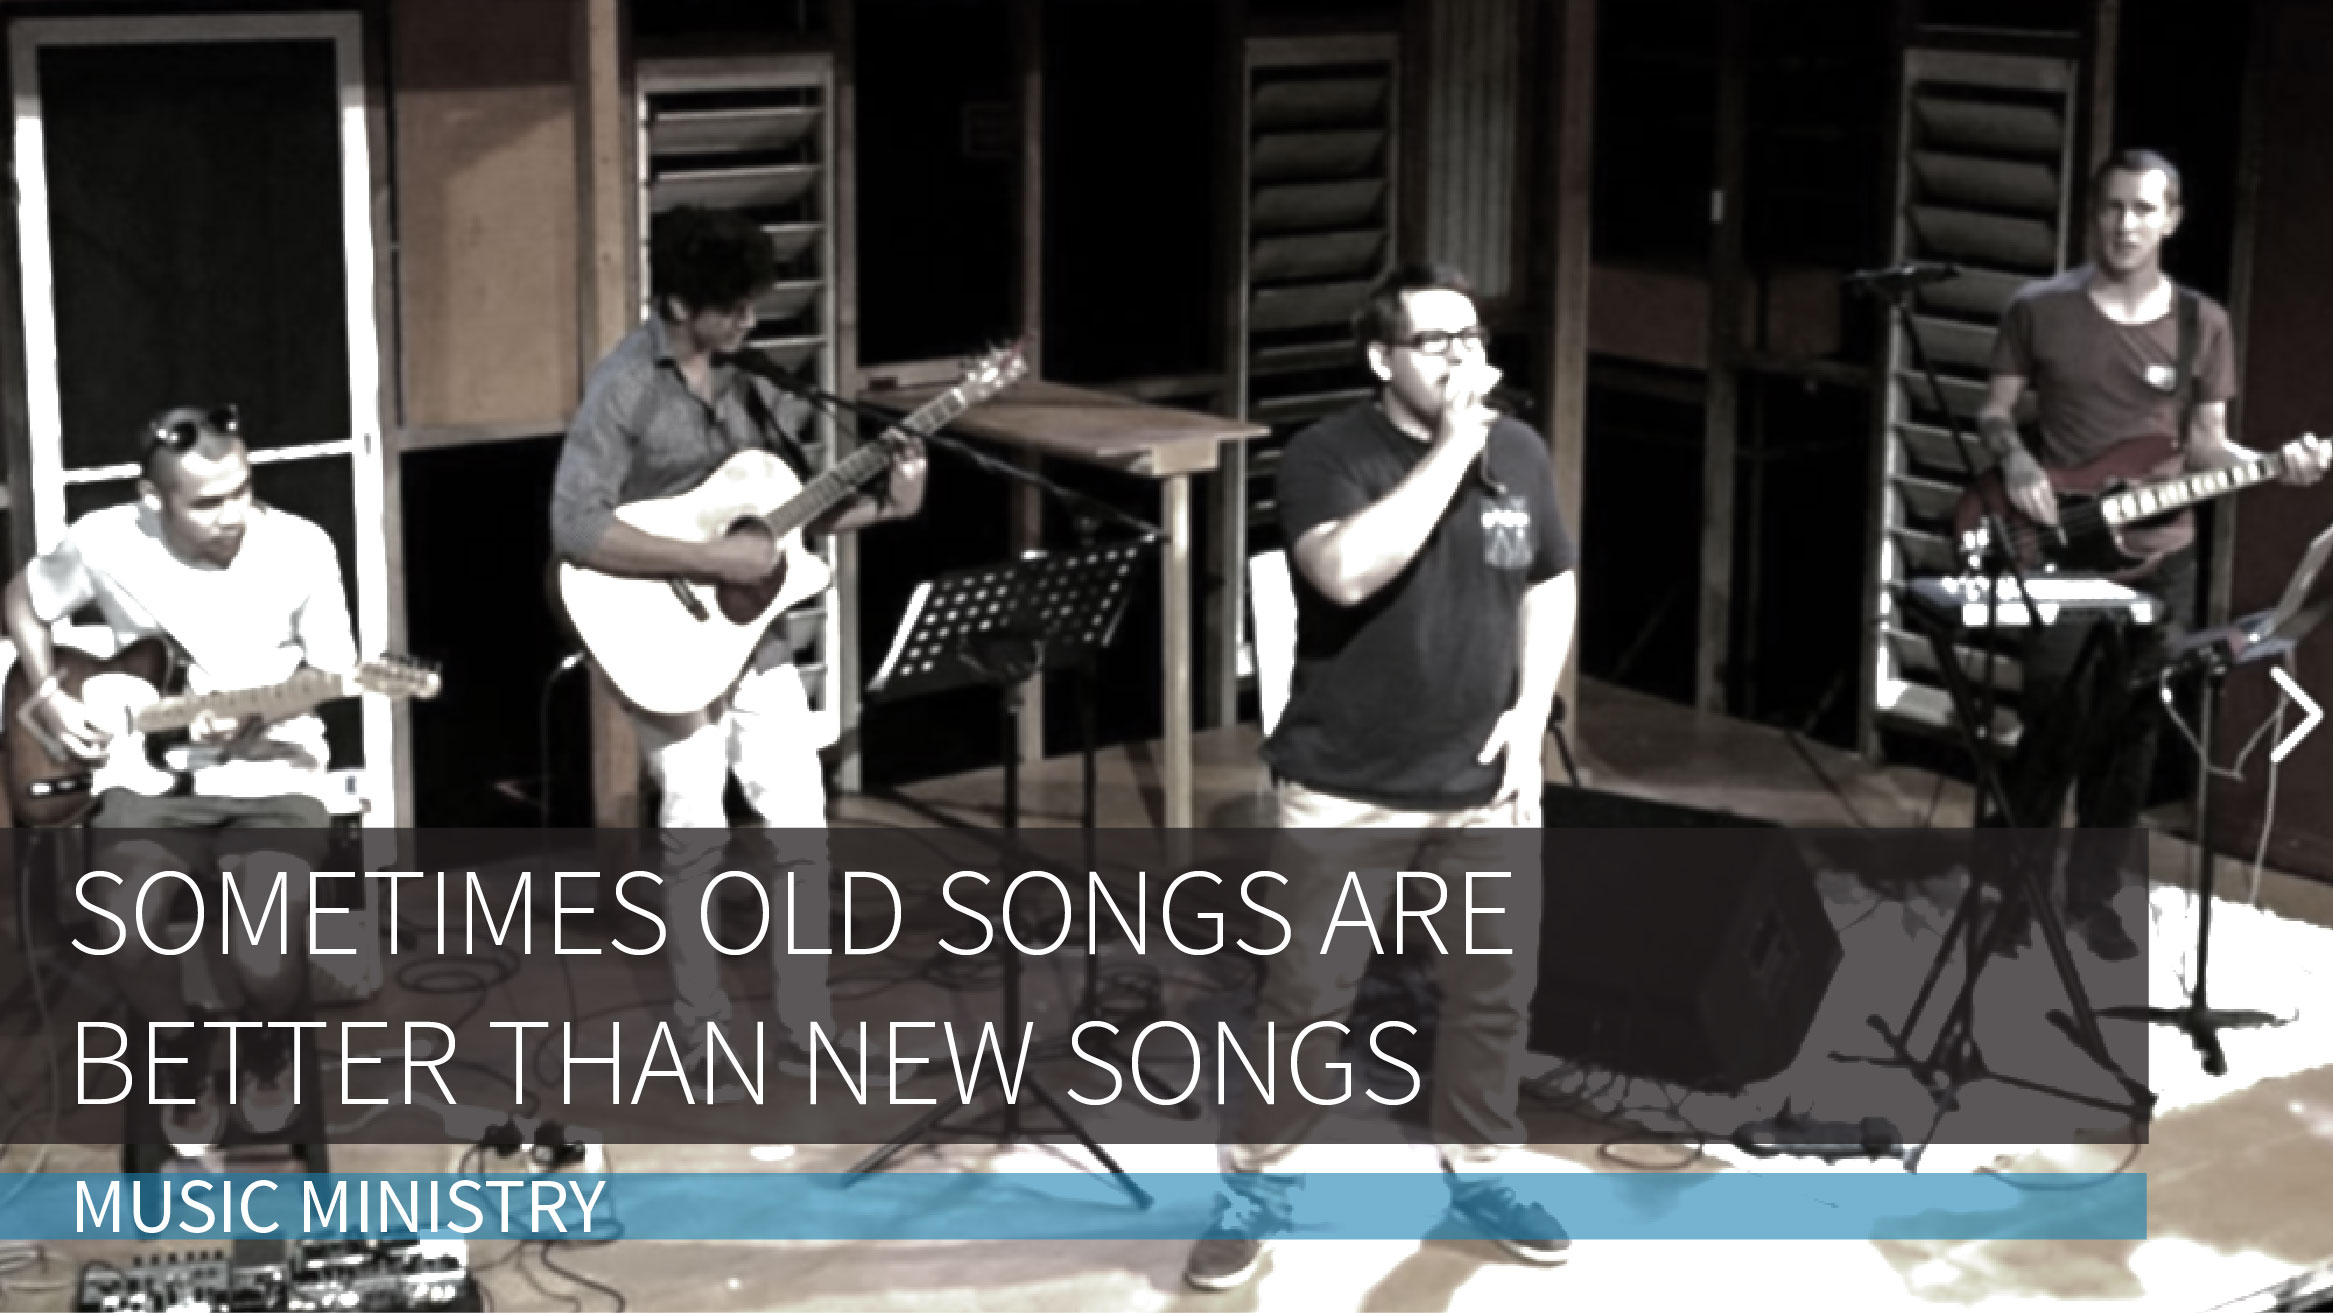 Sometimes-old-songs-are-better-than-new-songs_560x315-24.jpg